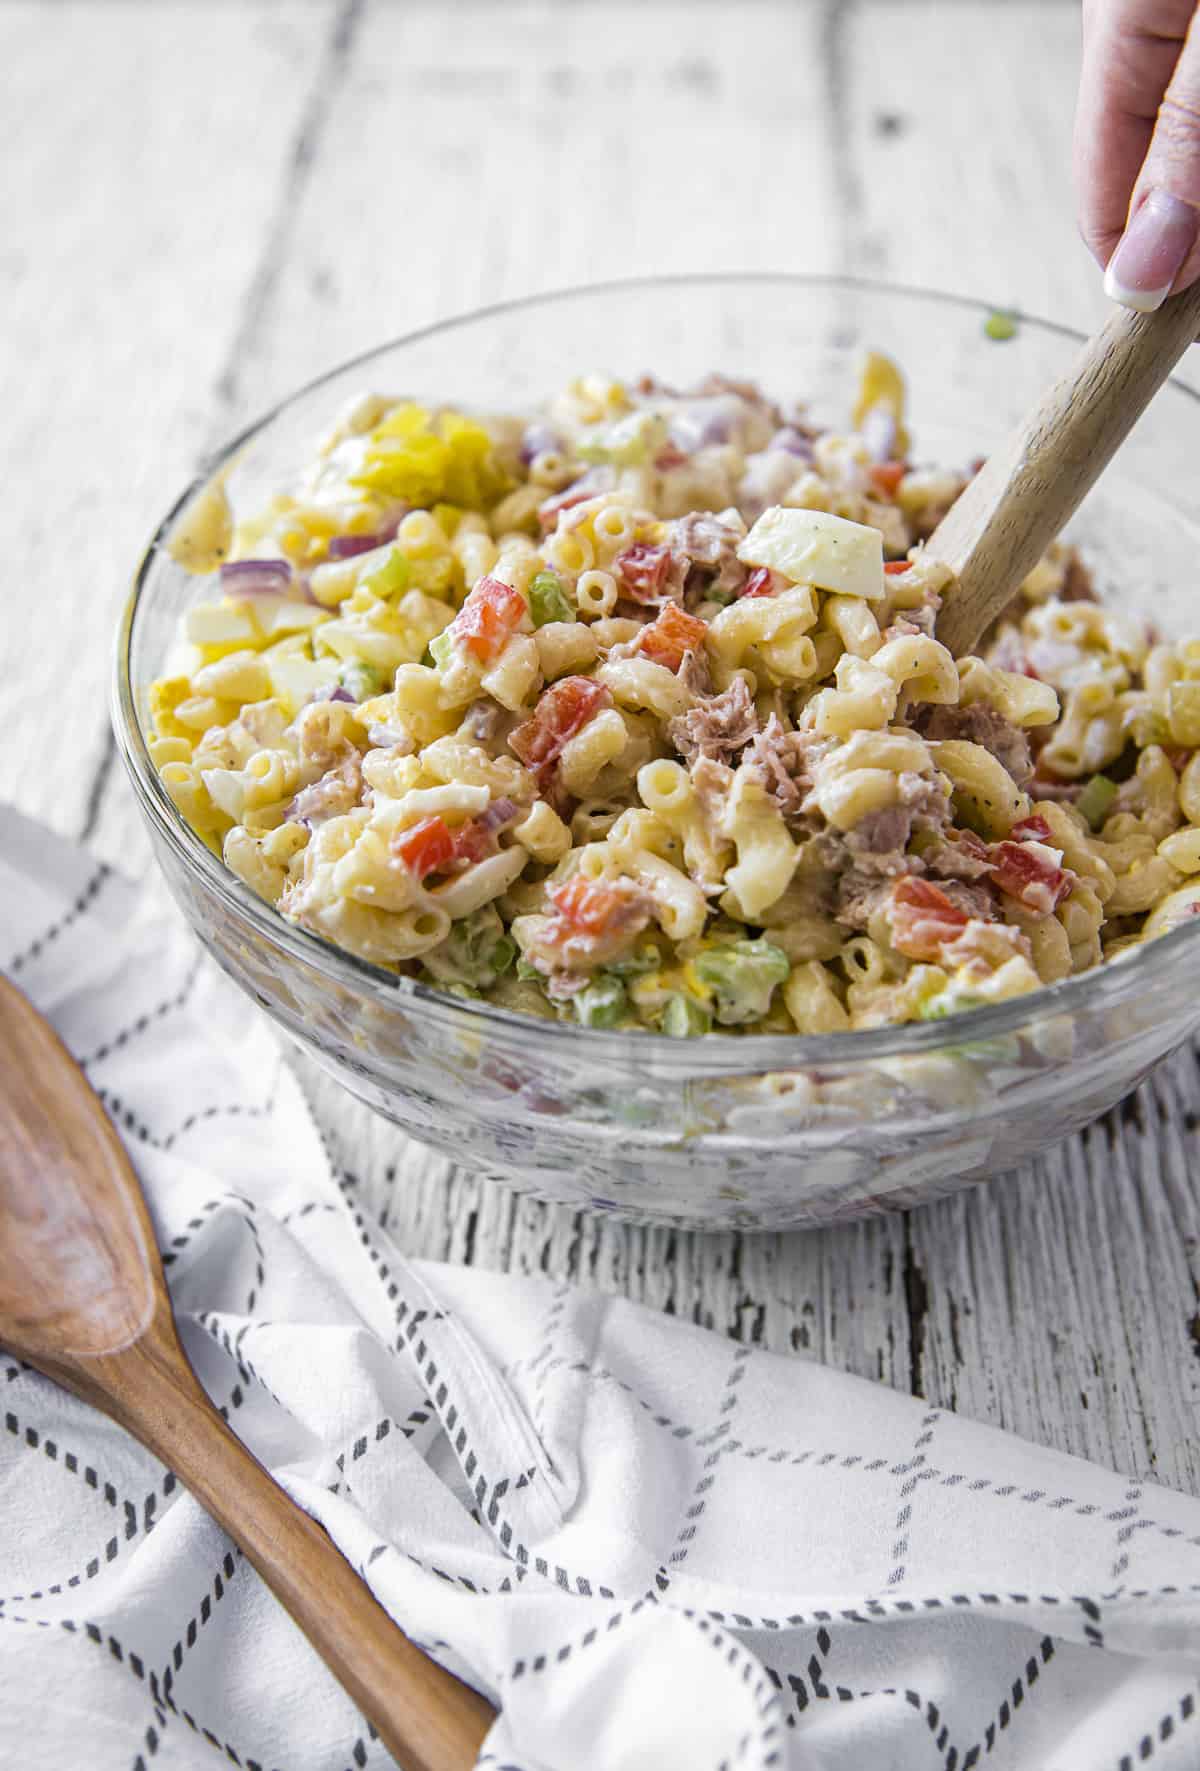 Mixing Tuna Macaroni Salad in a glass bowl with a wooden spoon